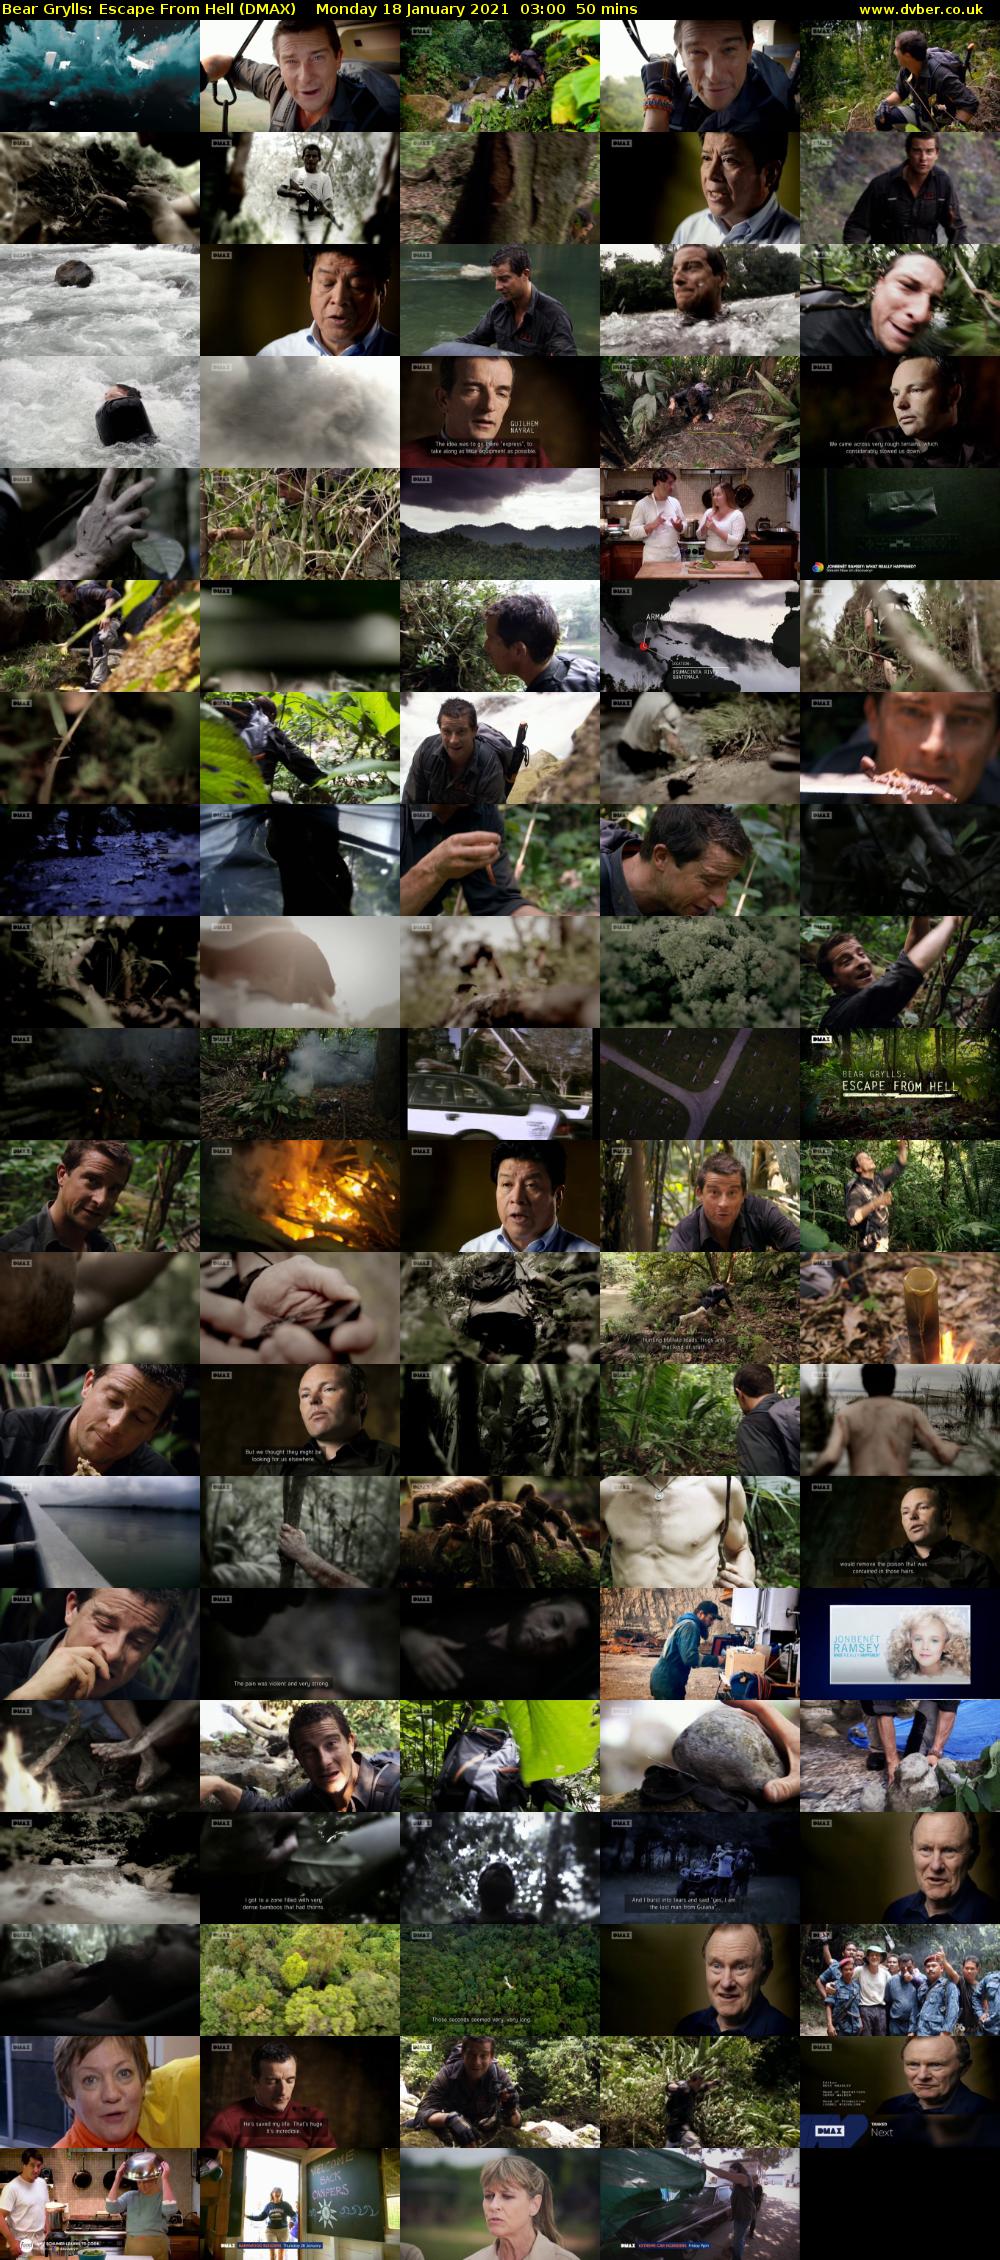 Bear Grylls: Escape From Hell (DMAX) Monday 18 January 2021 03:00 - 03:50